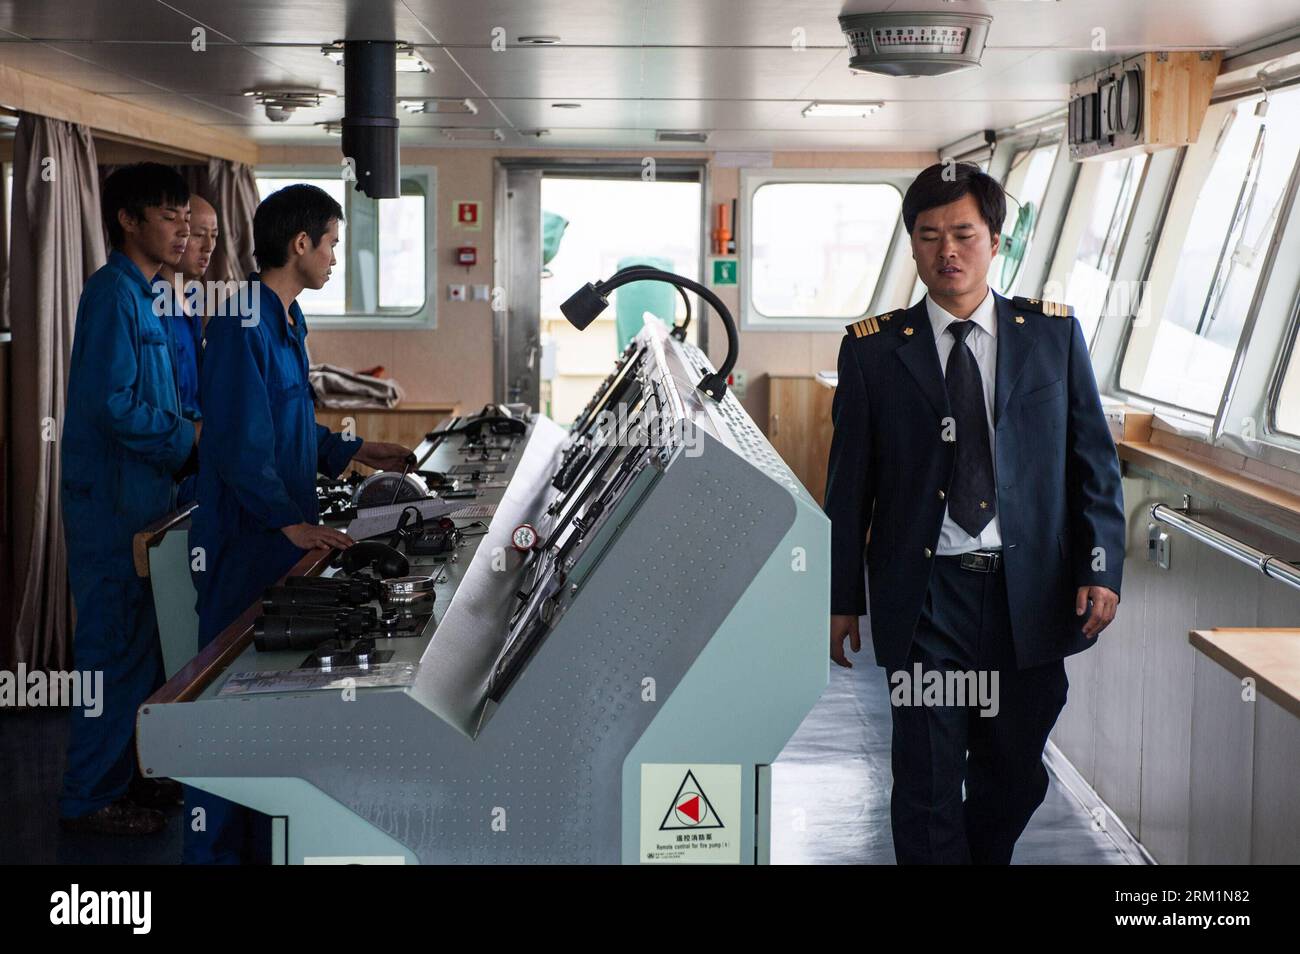 Bildnummer: 59604367  Datum: 24.04.2013  Copyright: imago/Xinhua NANJING, - Zhu Hui goes between the cockpit and the deck to check the Maple Star s sailing condition on the Yangtze River in east China s Jiangsu Province, April 24, 2013. Wang Lianmiao and Zhu Hui arrived at the port of Jingjiang on the morning of April 24, 2013. Both men are inland waterway pilots from the Yangtze River Pilot Centre. Awaiting them was the Maple Star, a 180-meter-long Marshall Islands-flagged cargo ship with a gross register tonnage of over 23,000. Under their pilotage, the Maple Star was to veer 180 degrees and Stock Photo